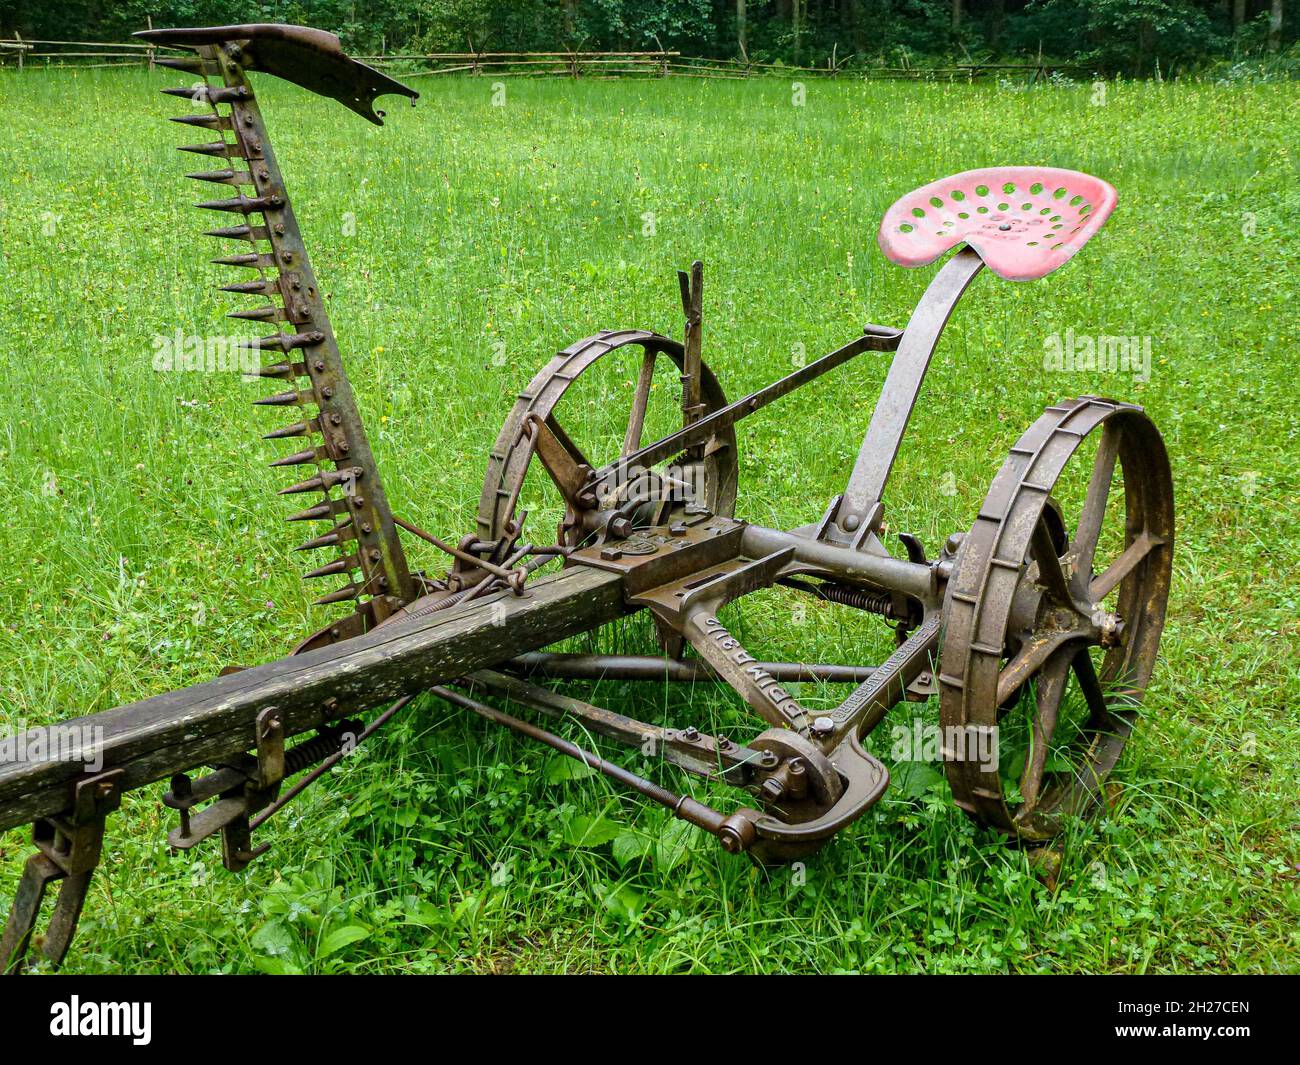 Old sickle bar mower on the grass Stock Photo